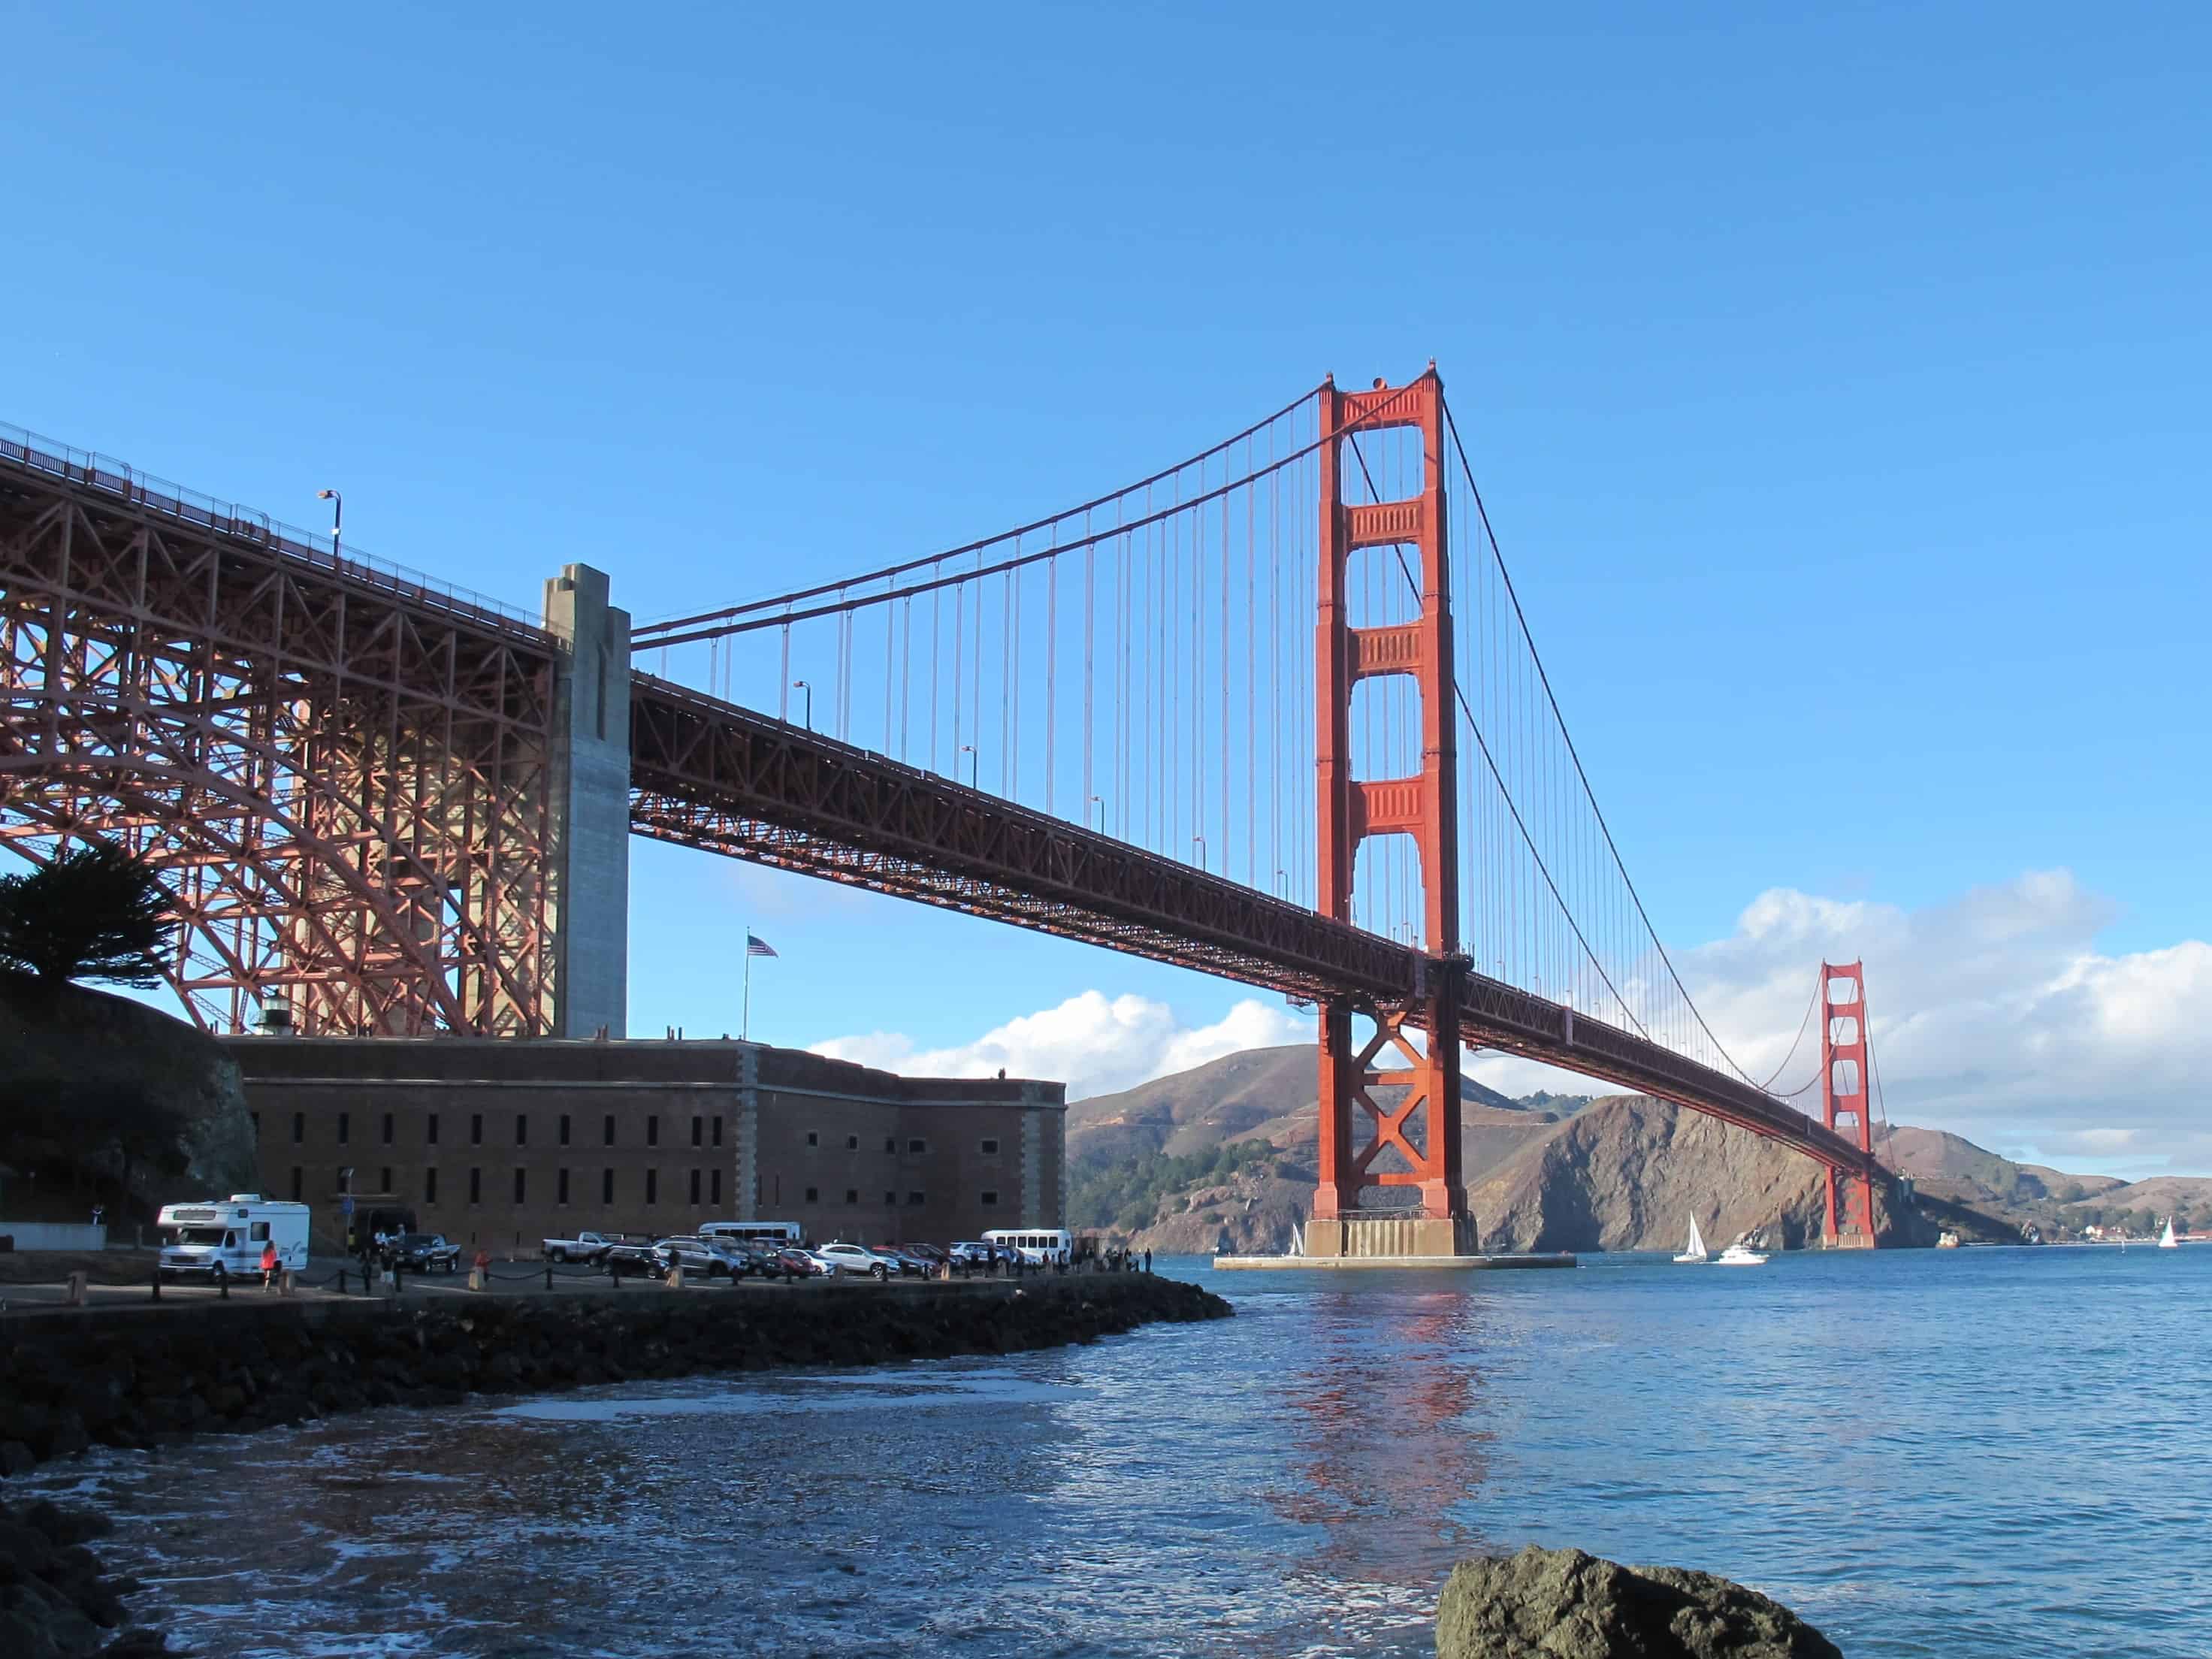 Looking for fun things to do in San Francisco with kids? Traveling with children is hard. Here are things to do in san francisco with toddlers, young kids and even babies. #sanfrancisco